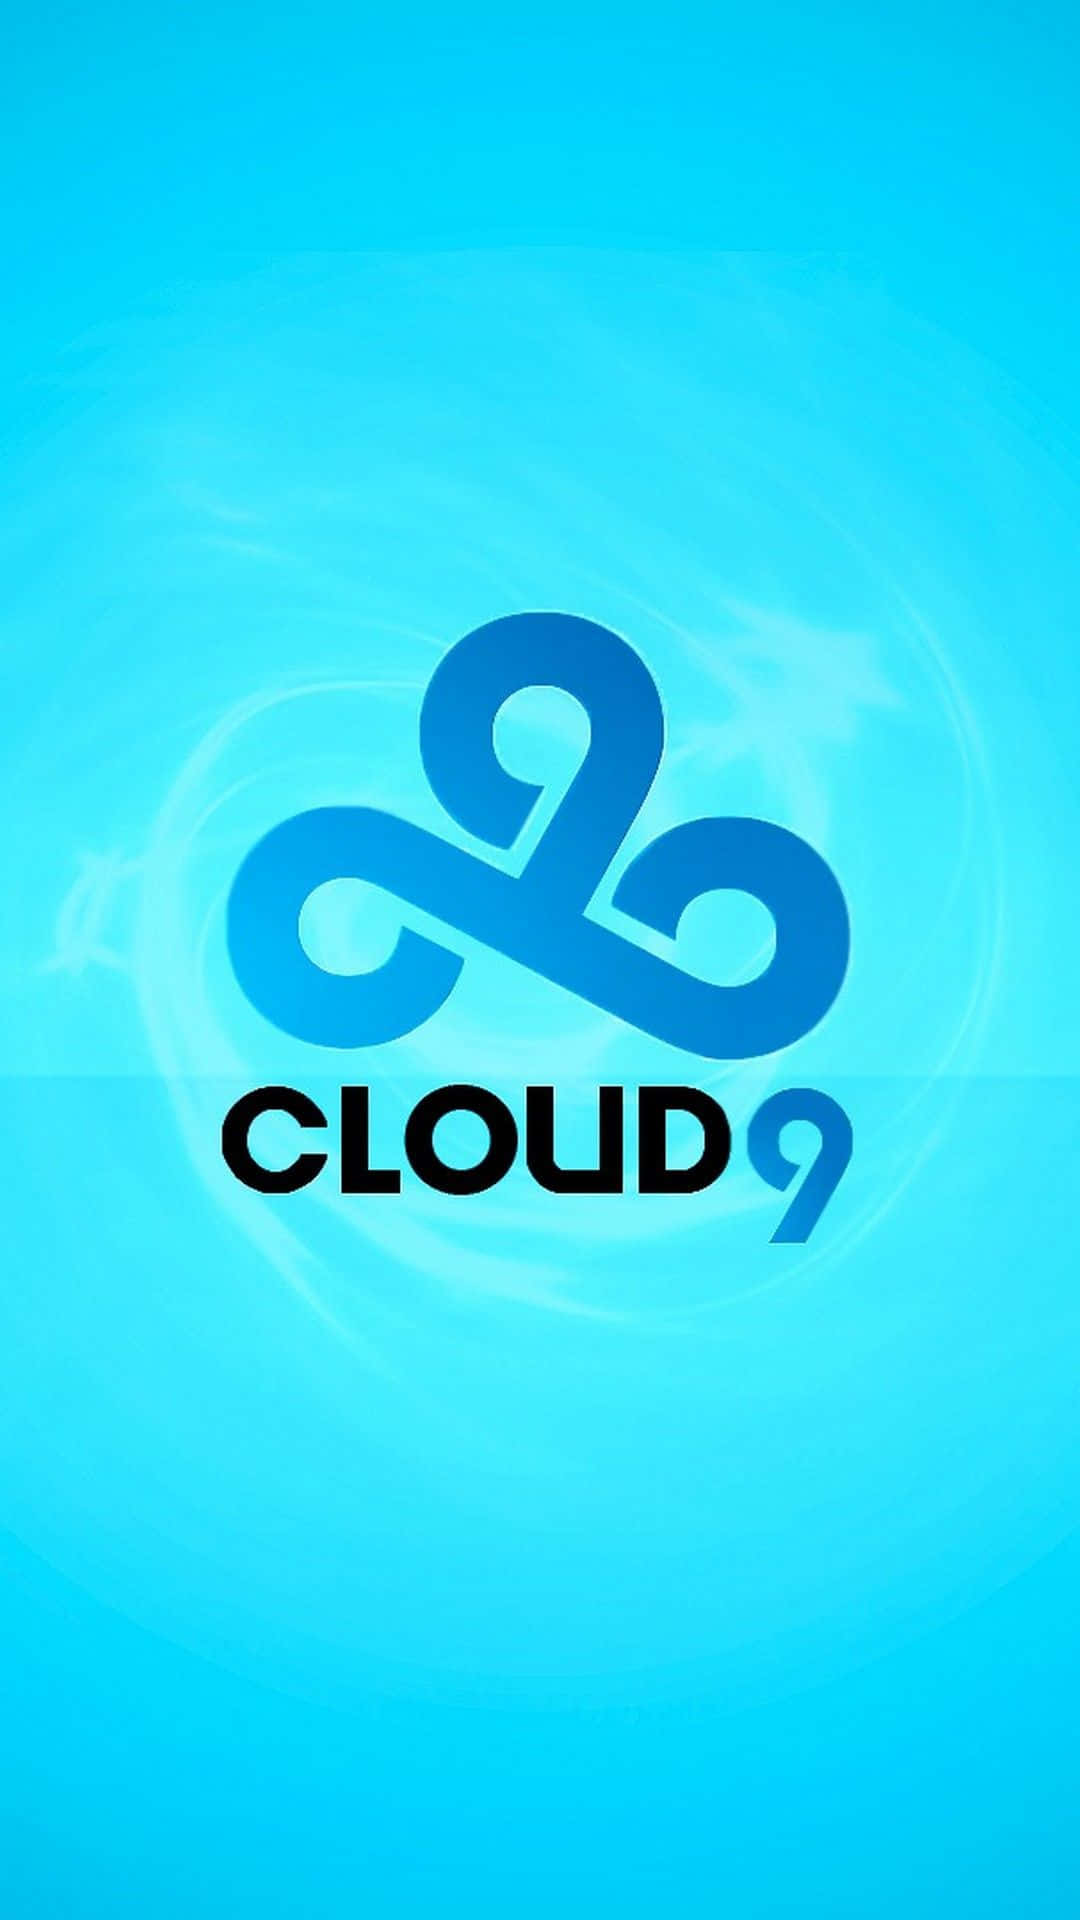 Cloud 9 - A Blue Background With The Cloud Logo Wallpaper